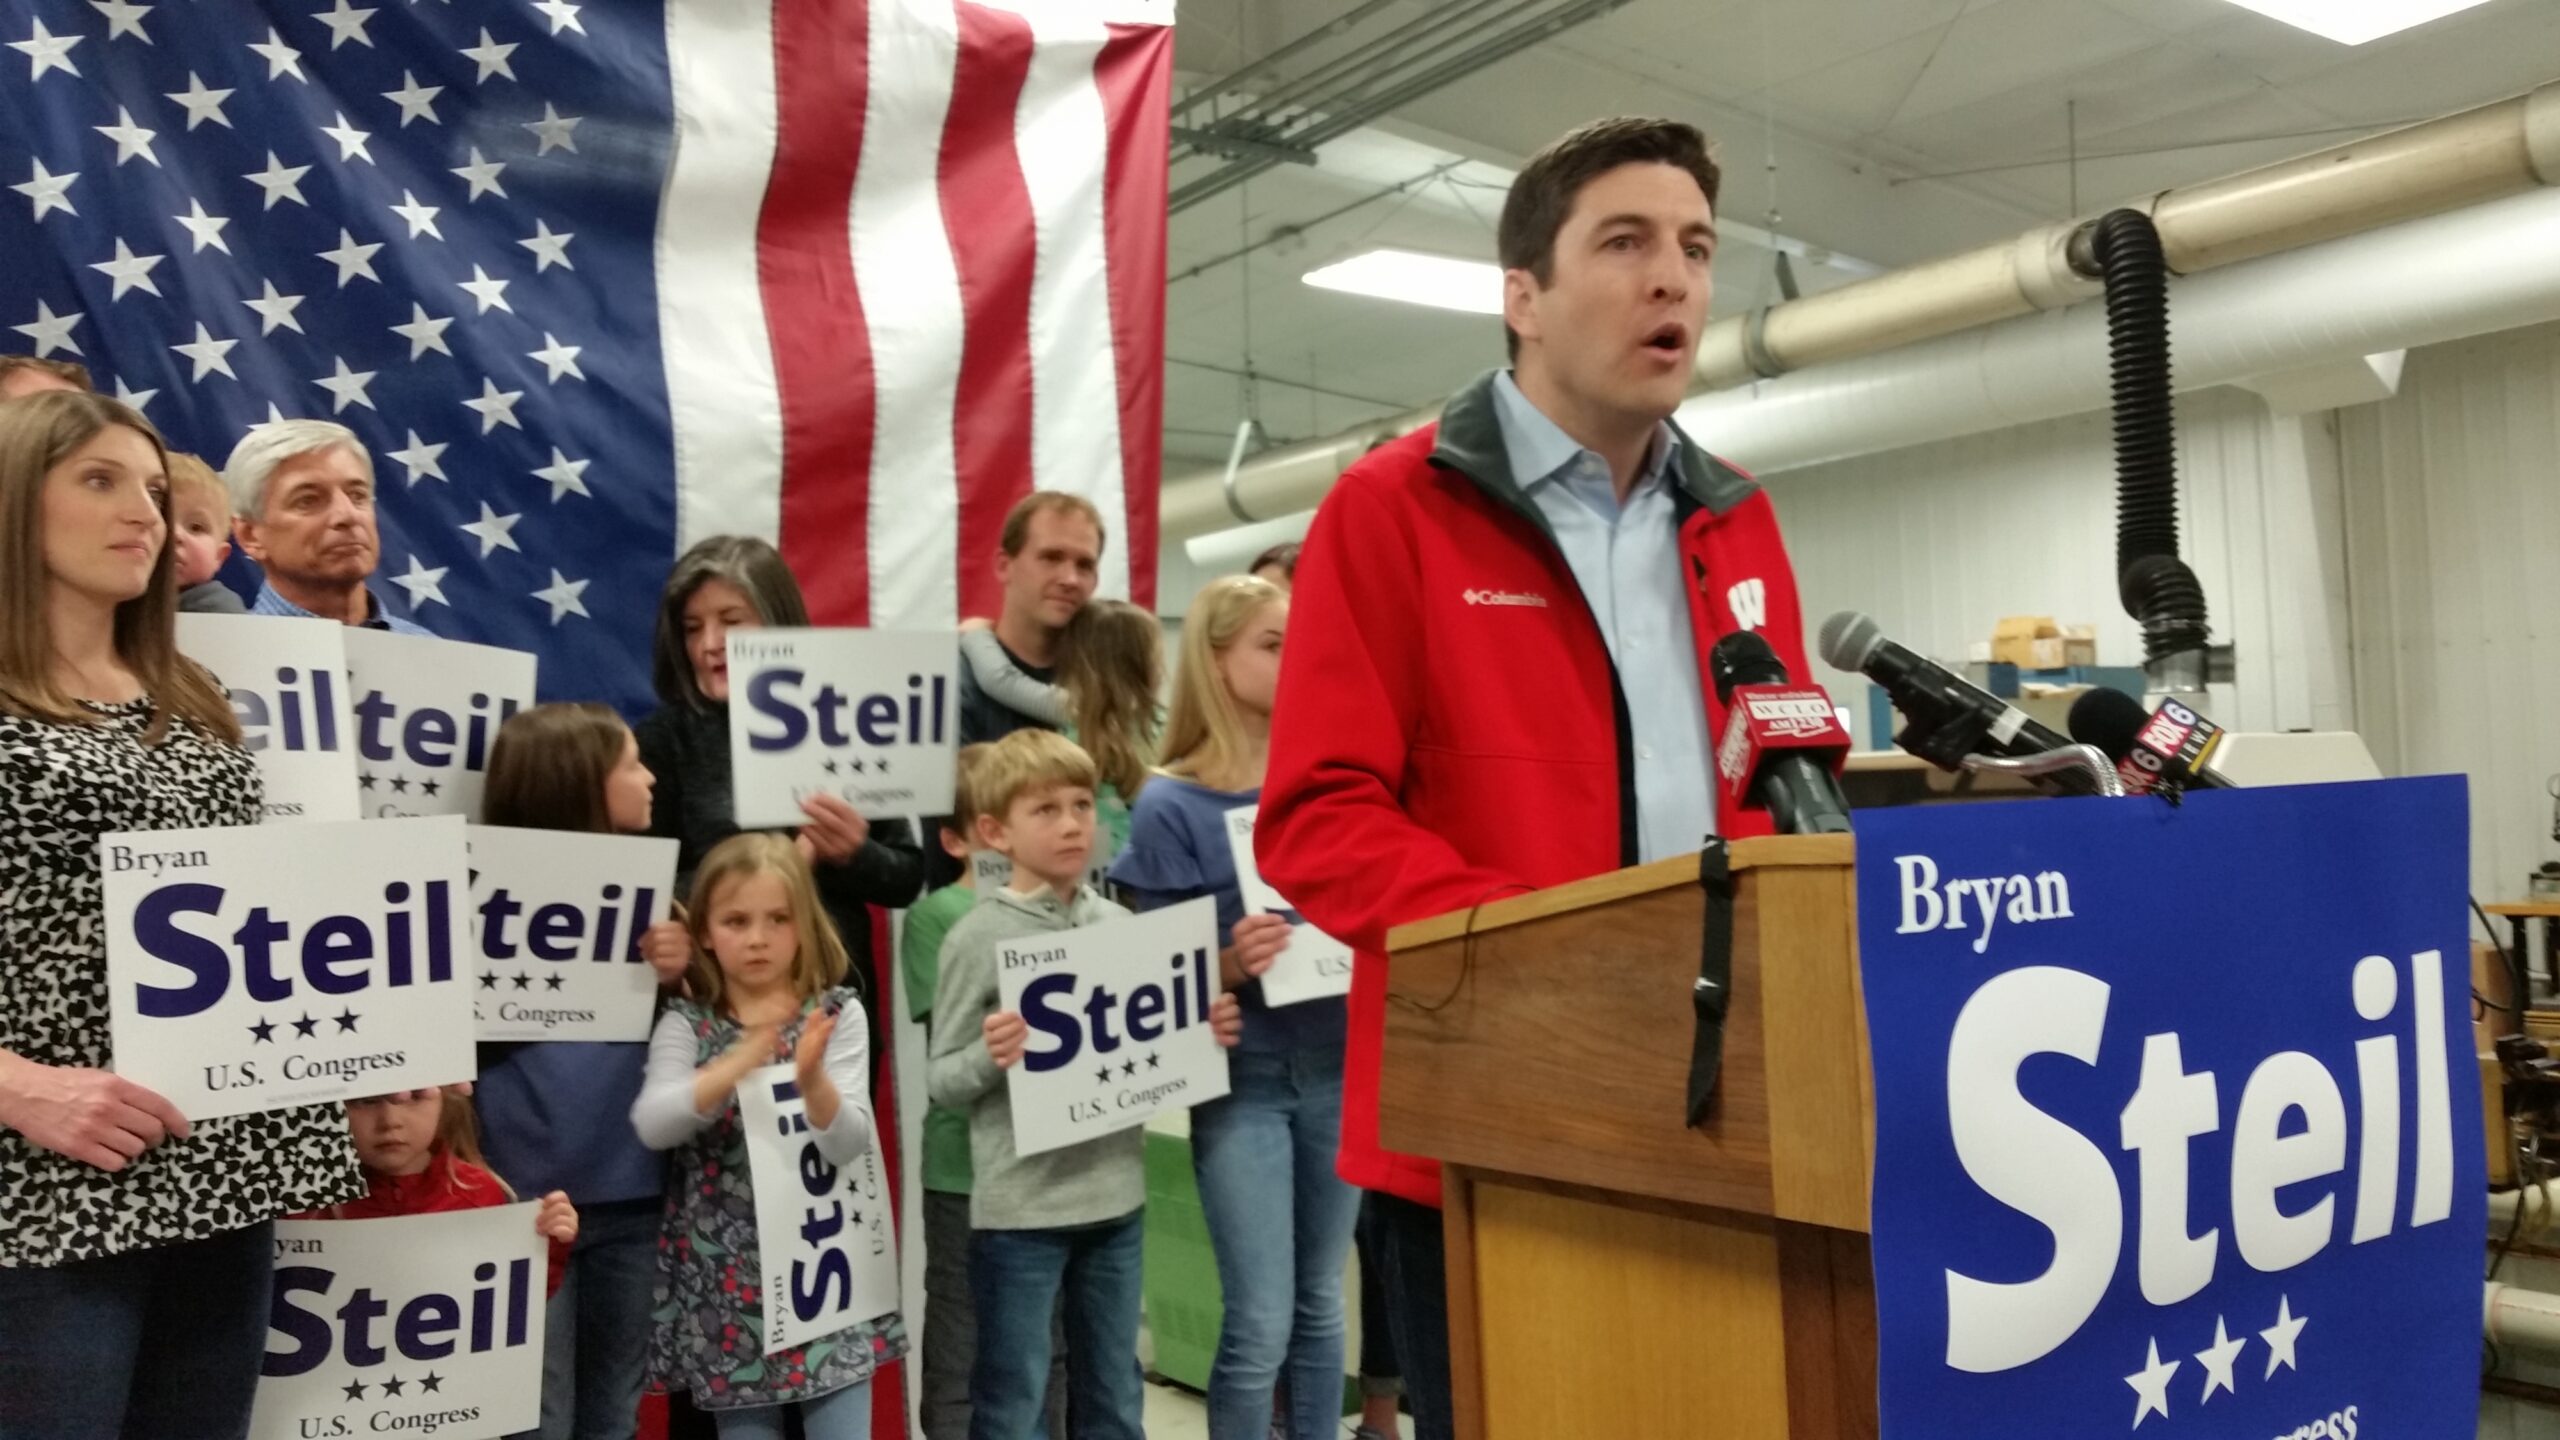 Republican Bryan Steil Launches Campaign For Ryan’s Congressional Seat